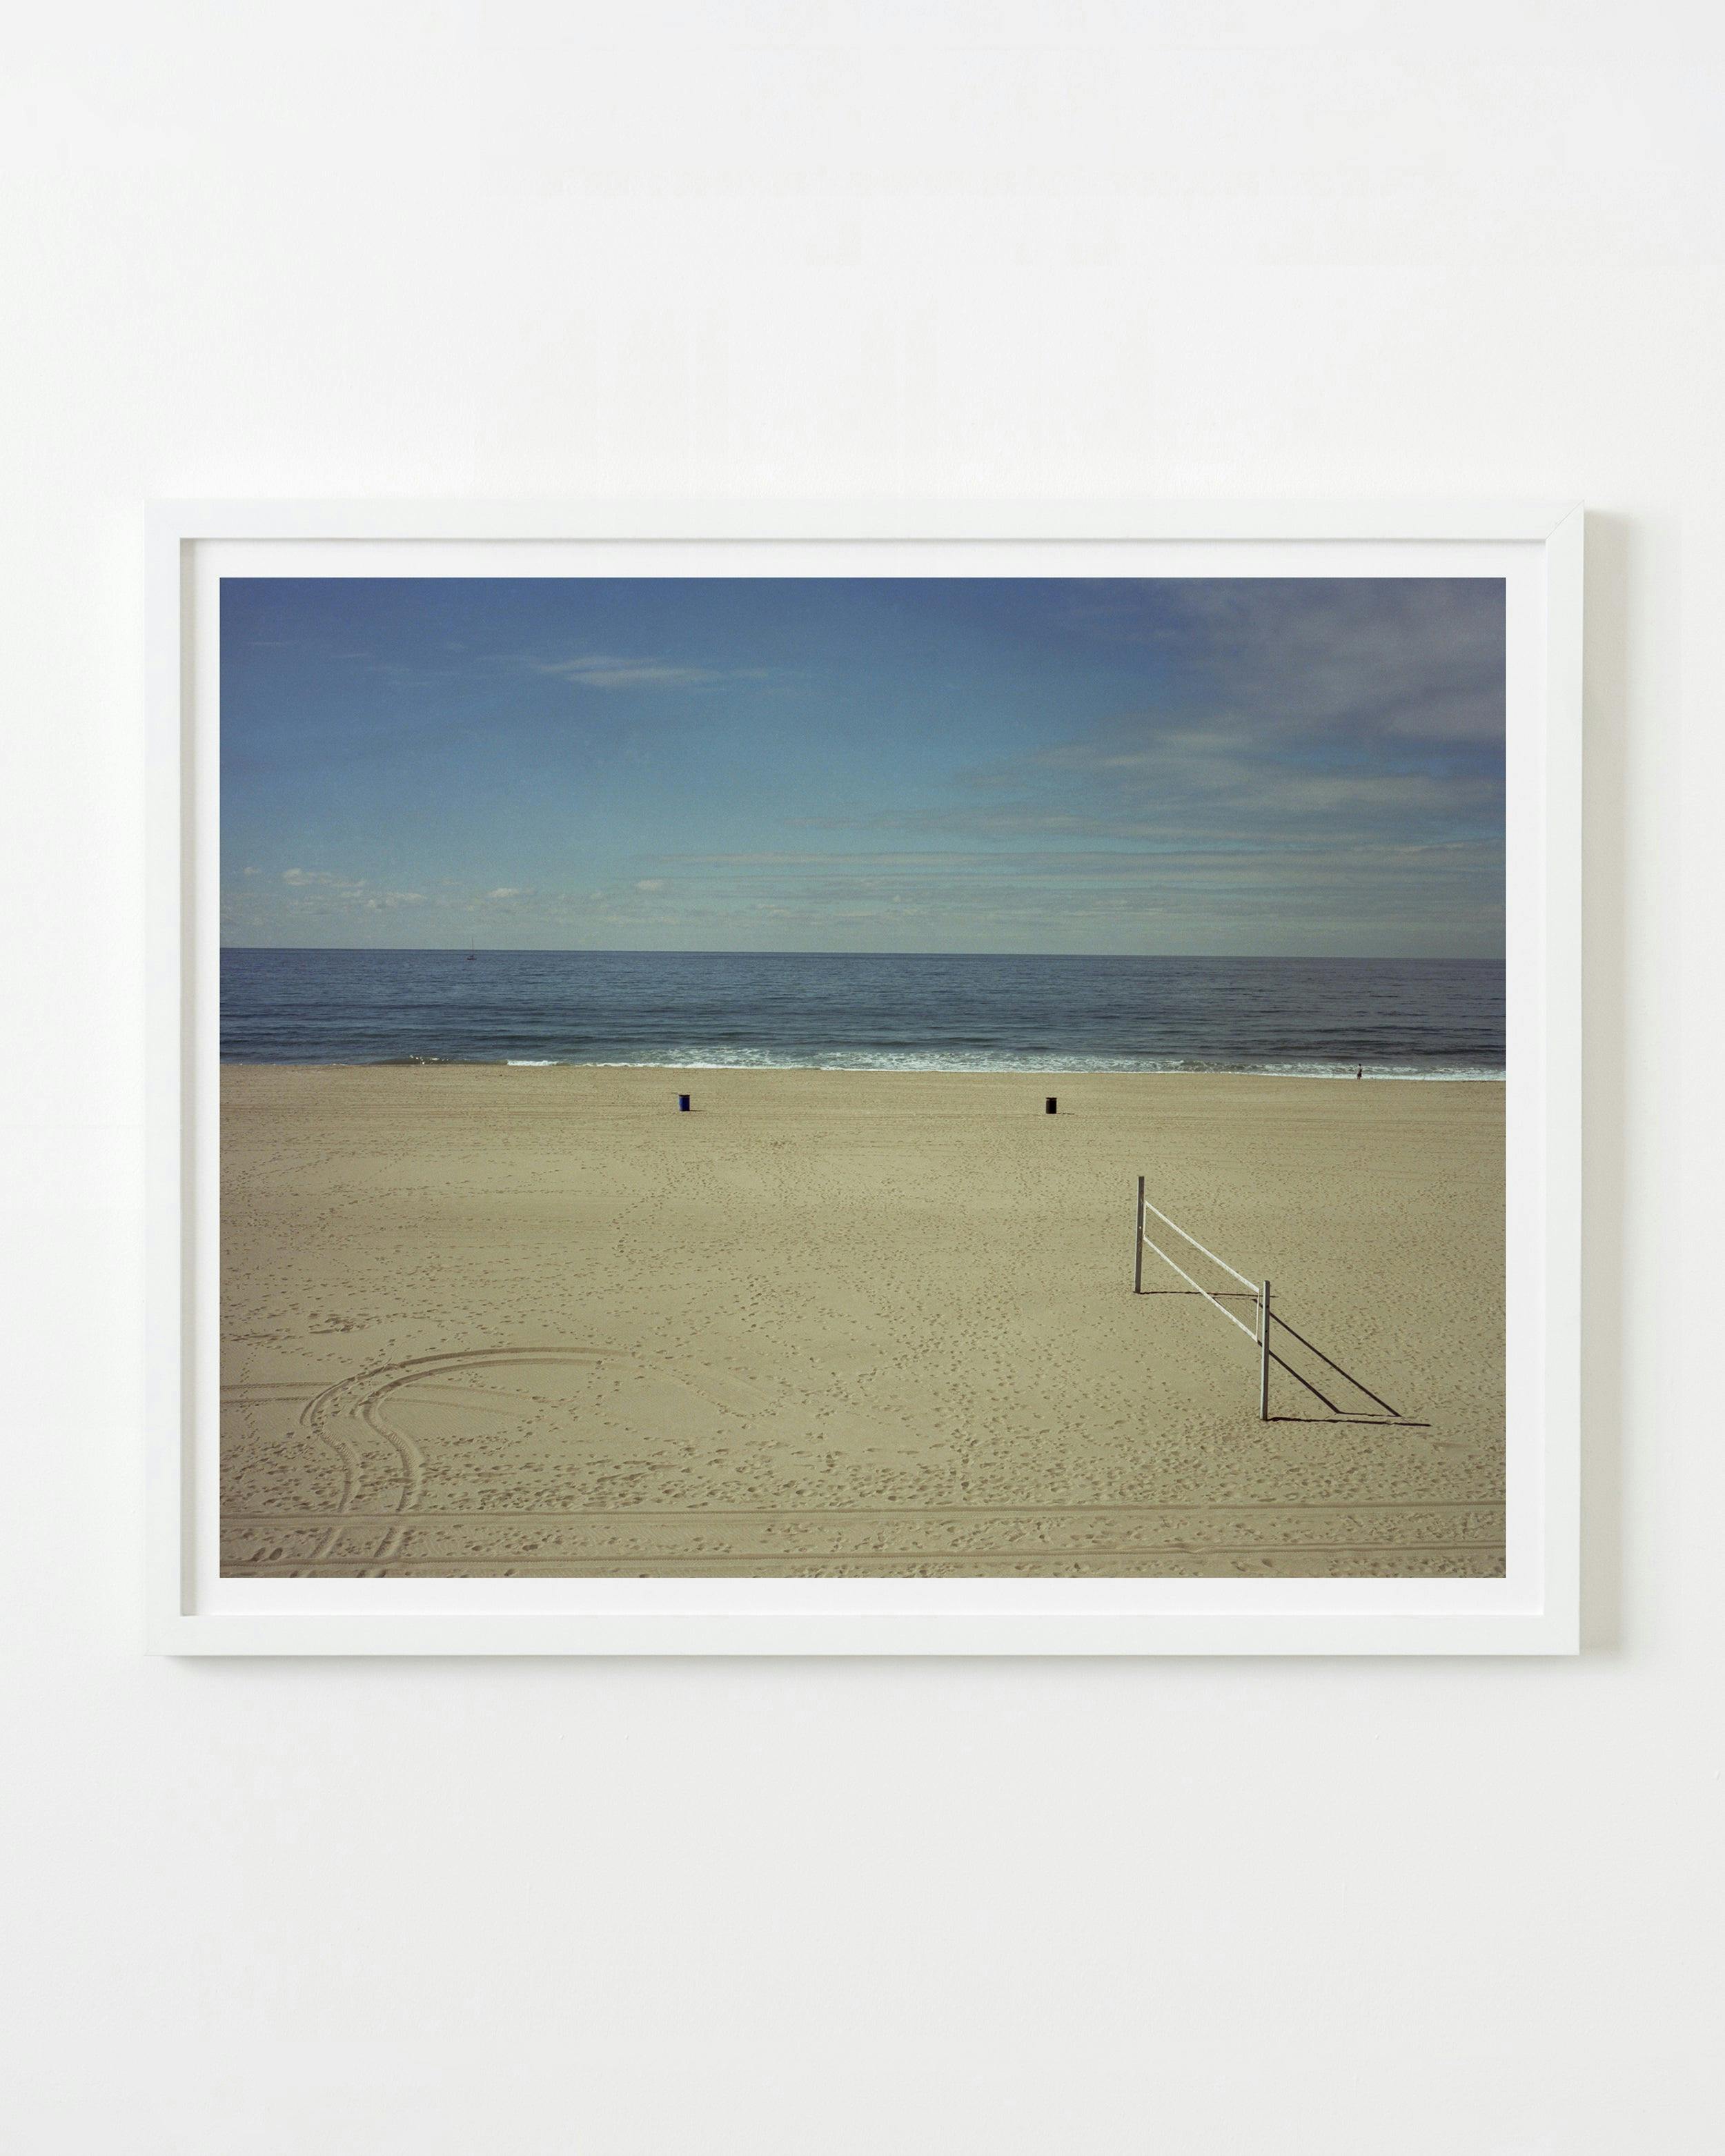 Photography by Nick Meyer titled "The Beach, Los Angeles".